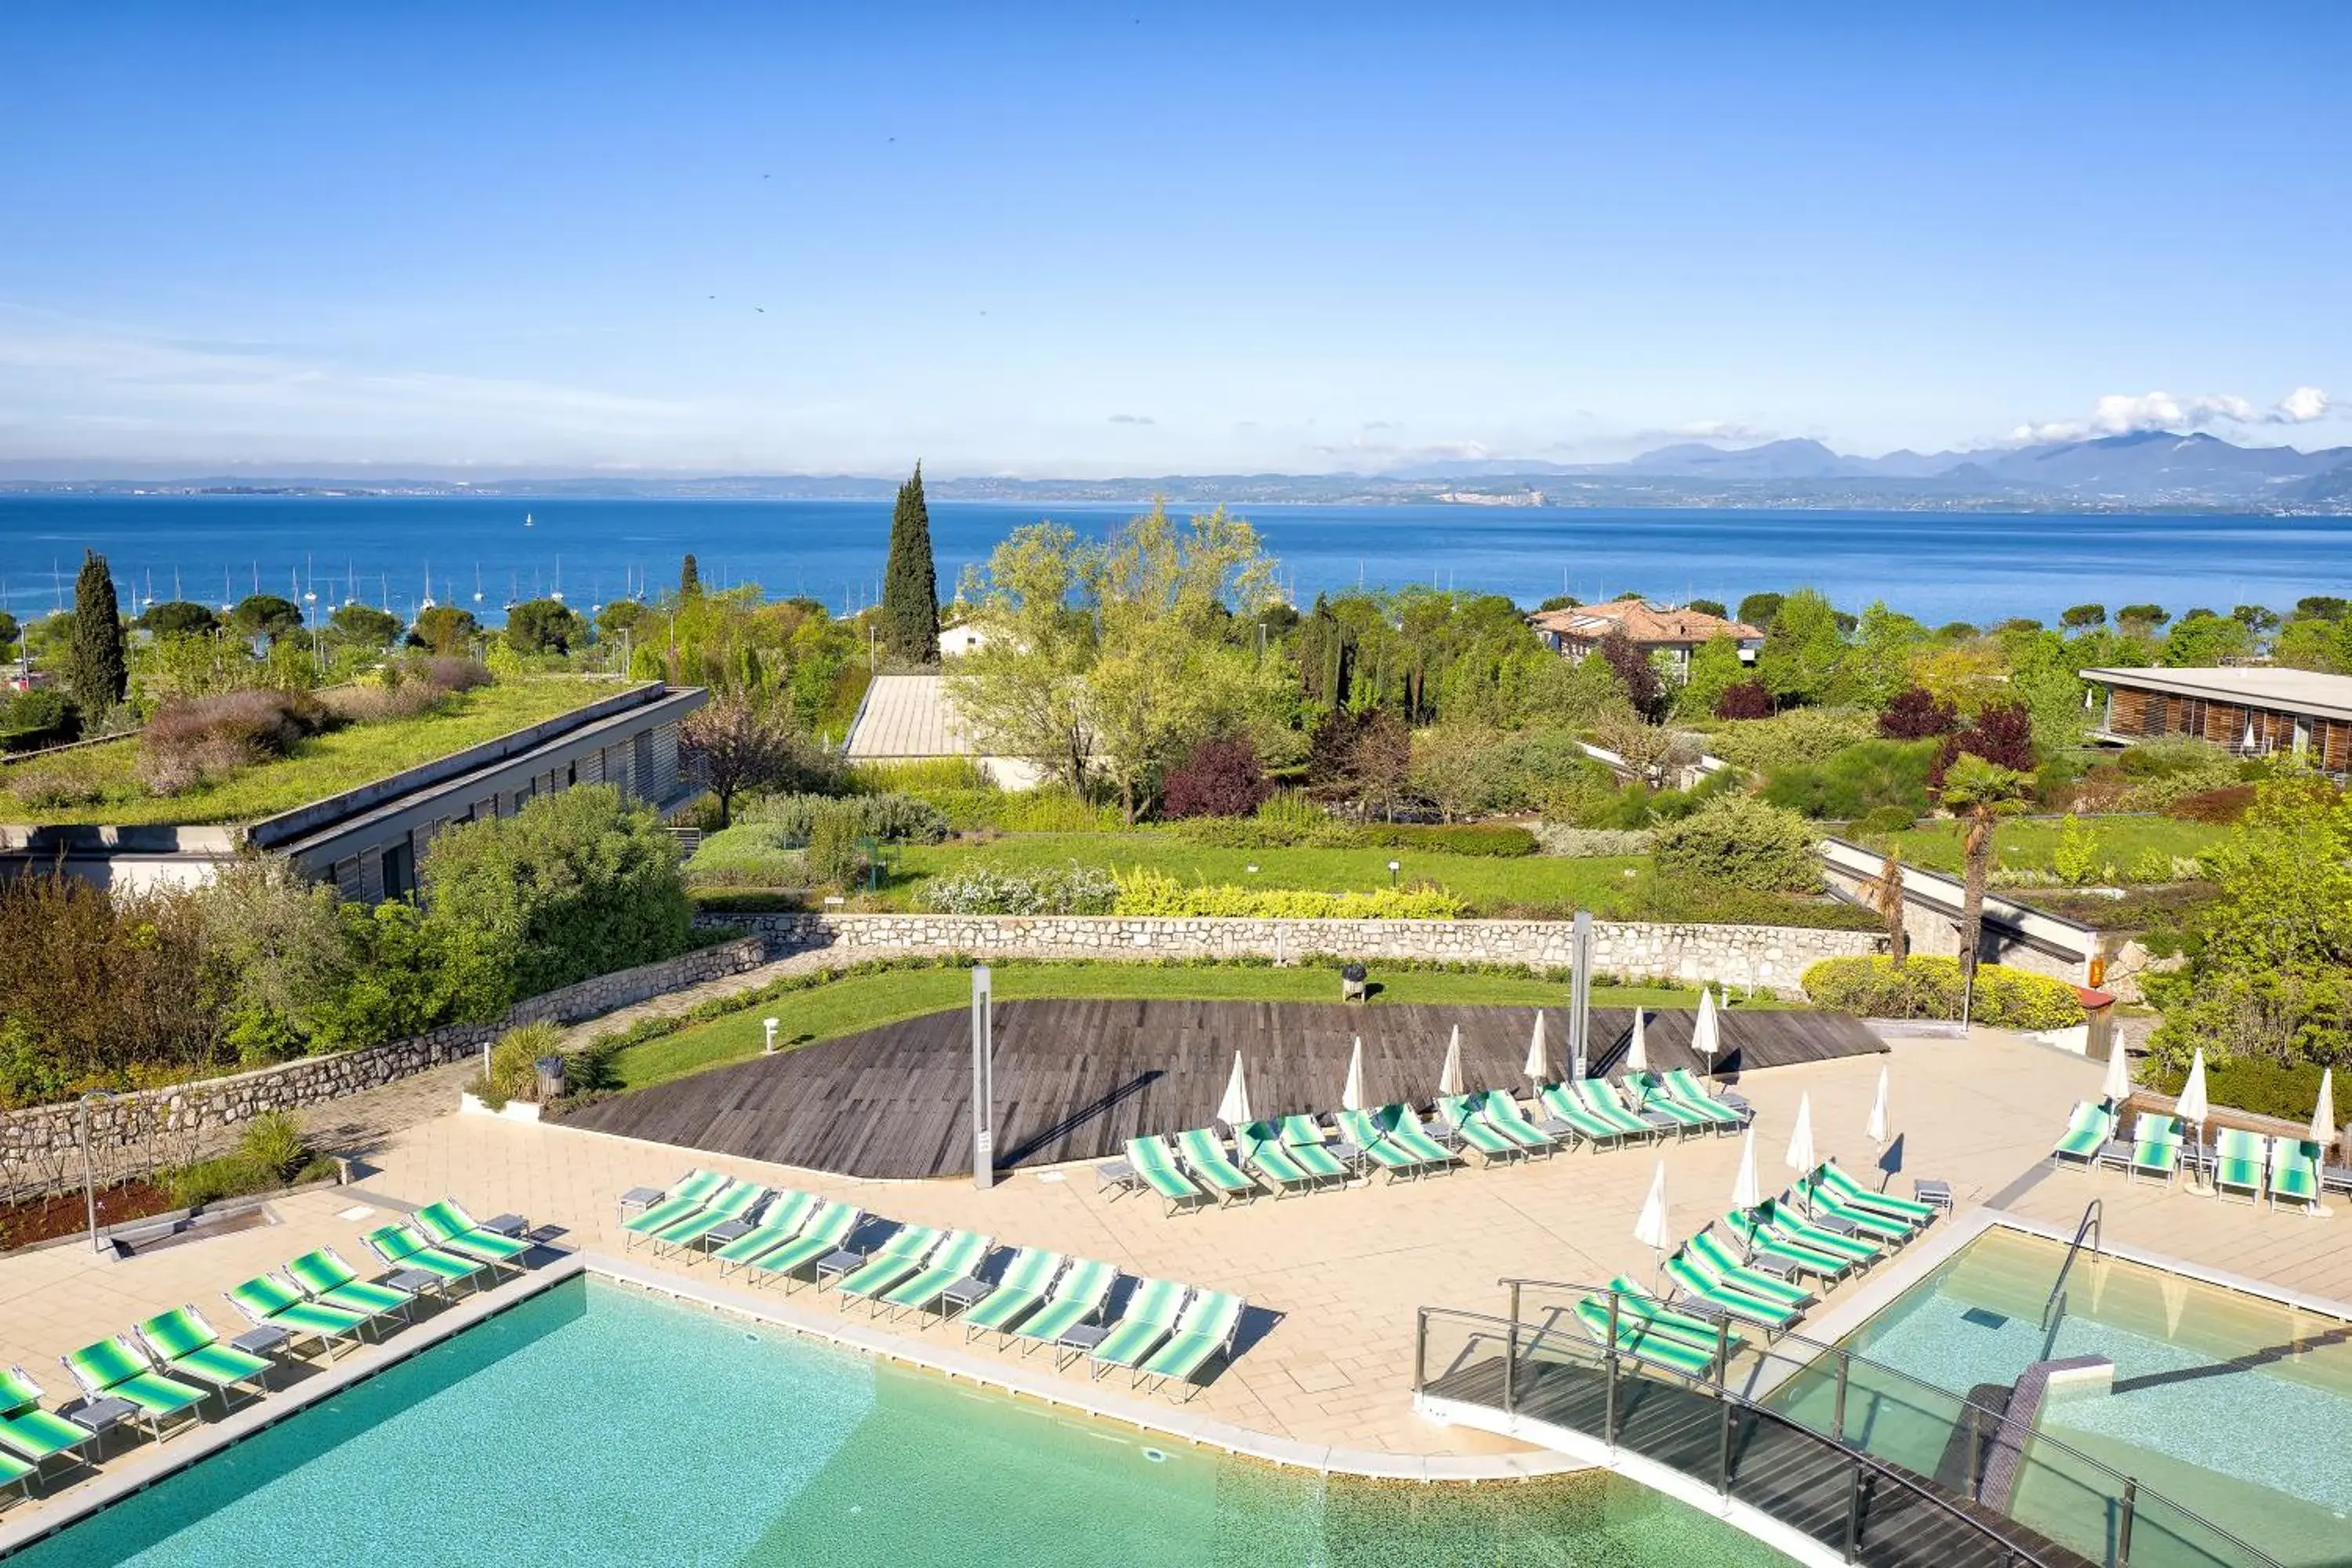 Bird's eye view, Pool View in Parc Hotel Germano Suites & Apartments